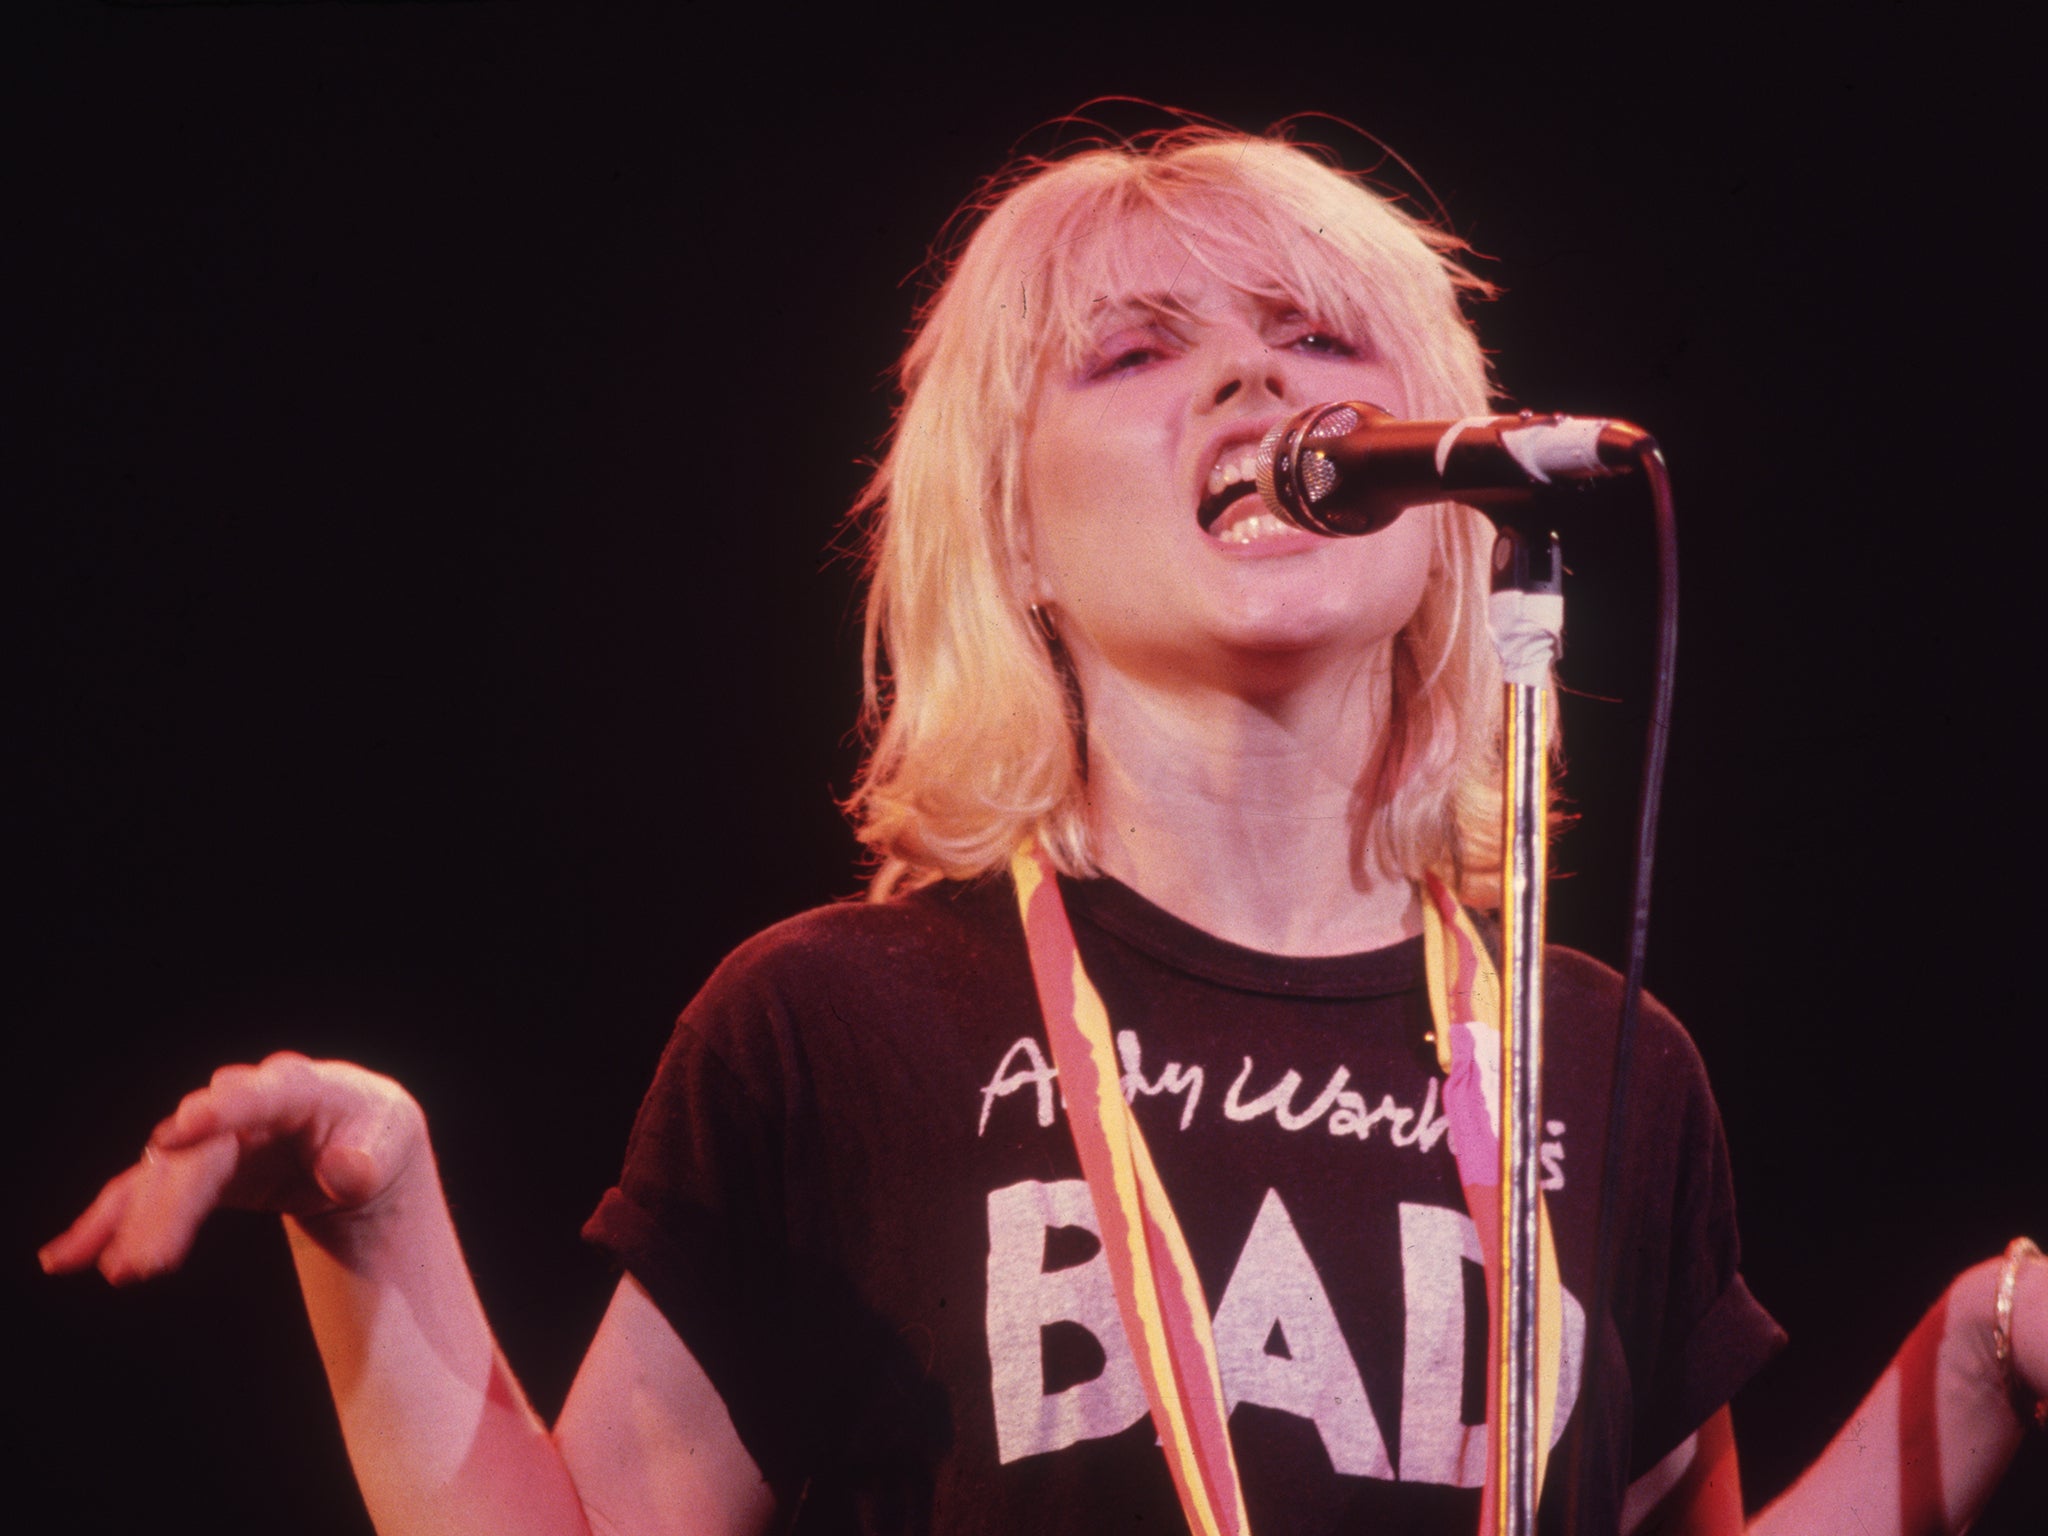 The 10 best songs by Blondie, from 'Call Me' to 'Hanging on the Telephone'